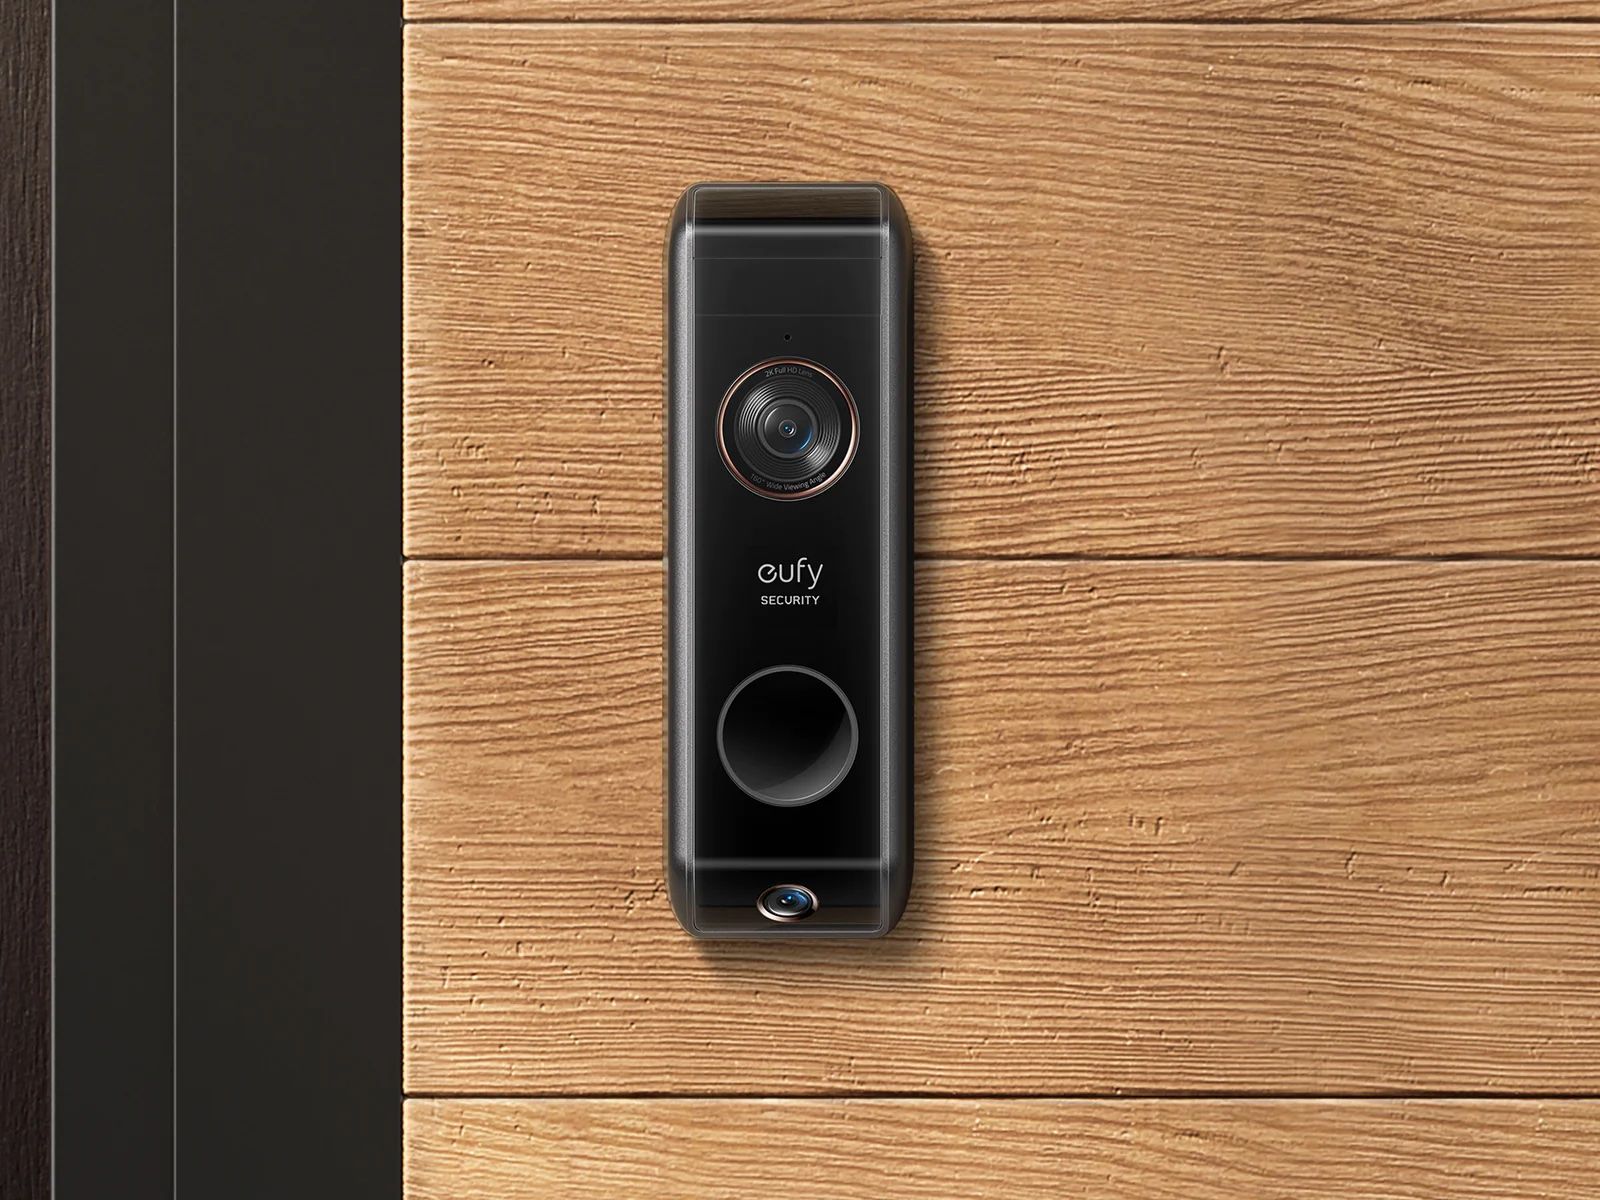 Eufy's dual-camera video doorbell mounted outside of a house